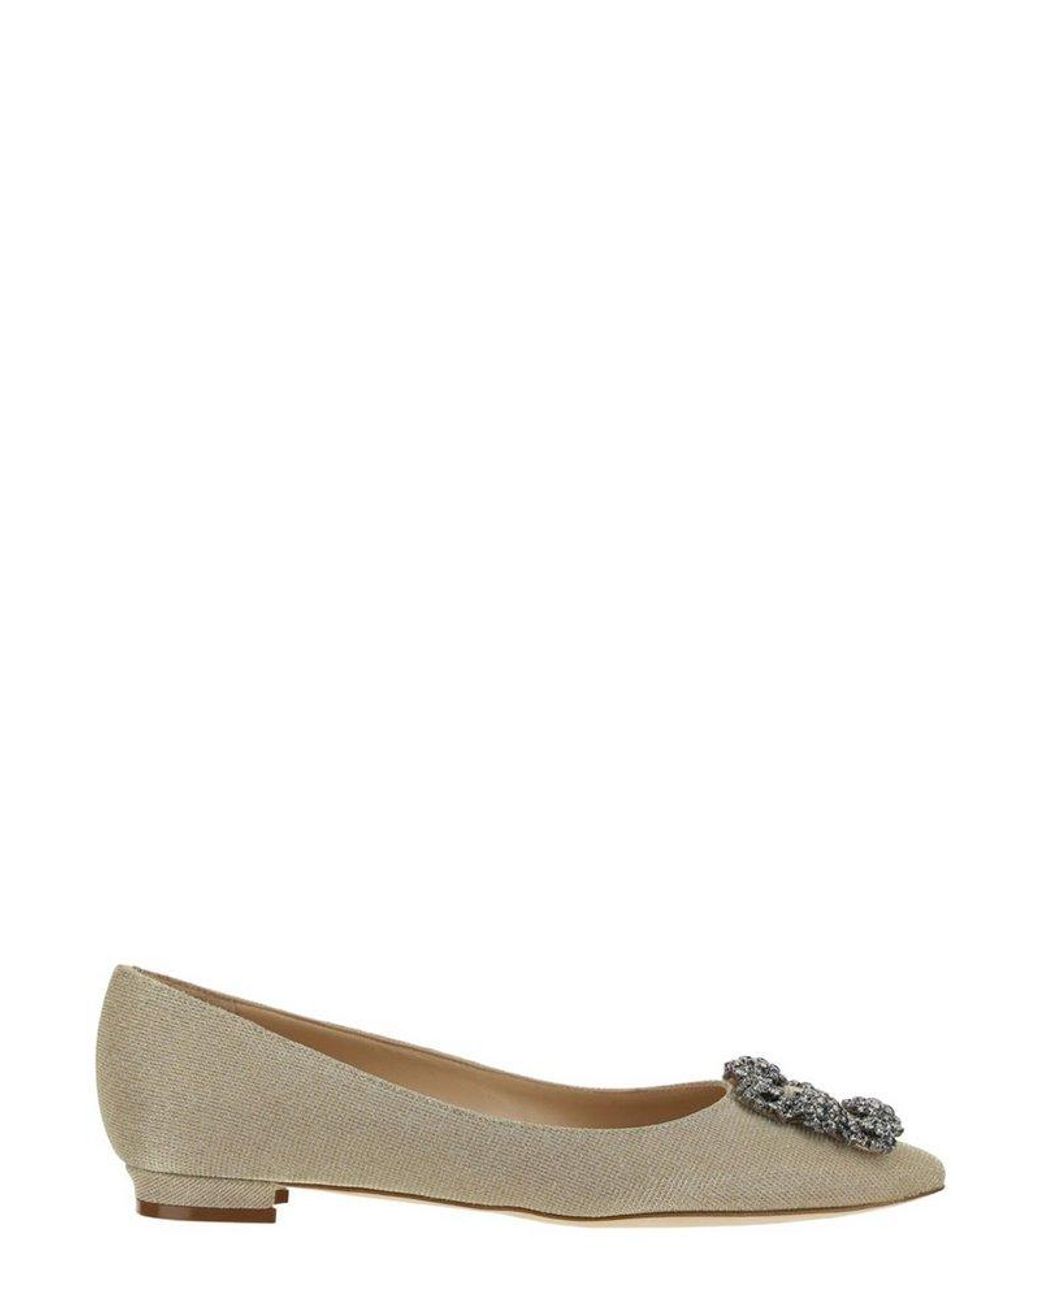 Manolo Blahnik Hangisi Pointed Toe Flats In Brown Lyst